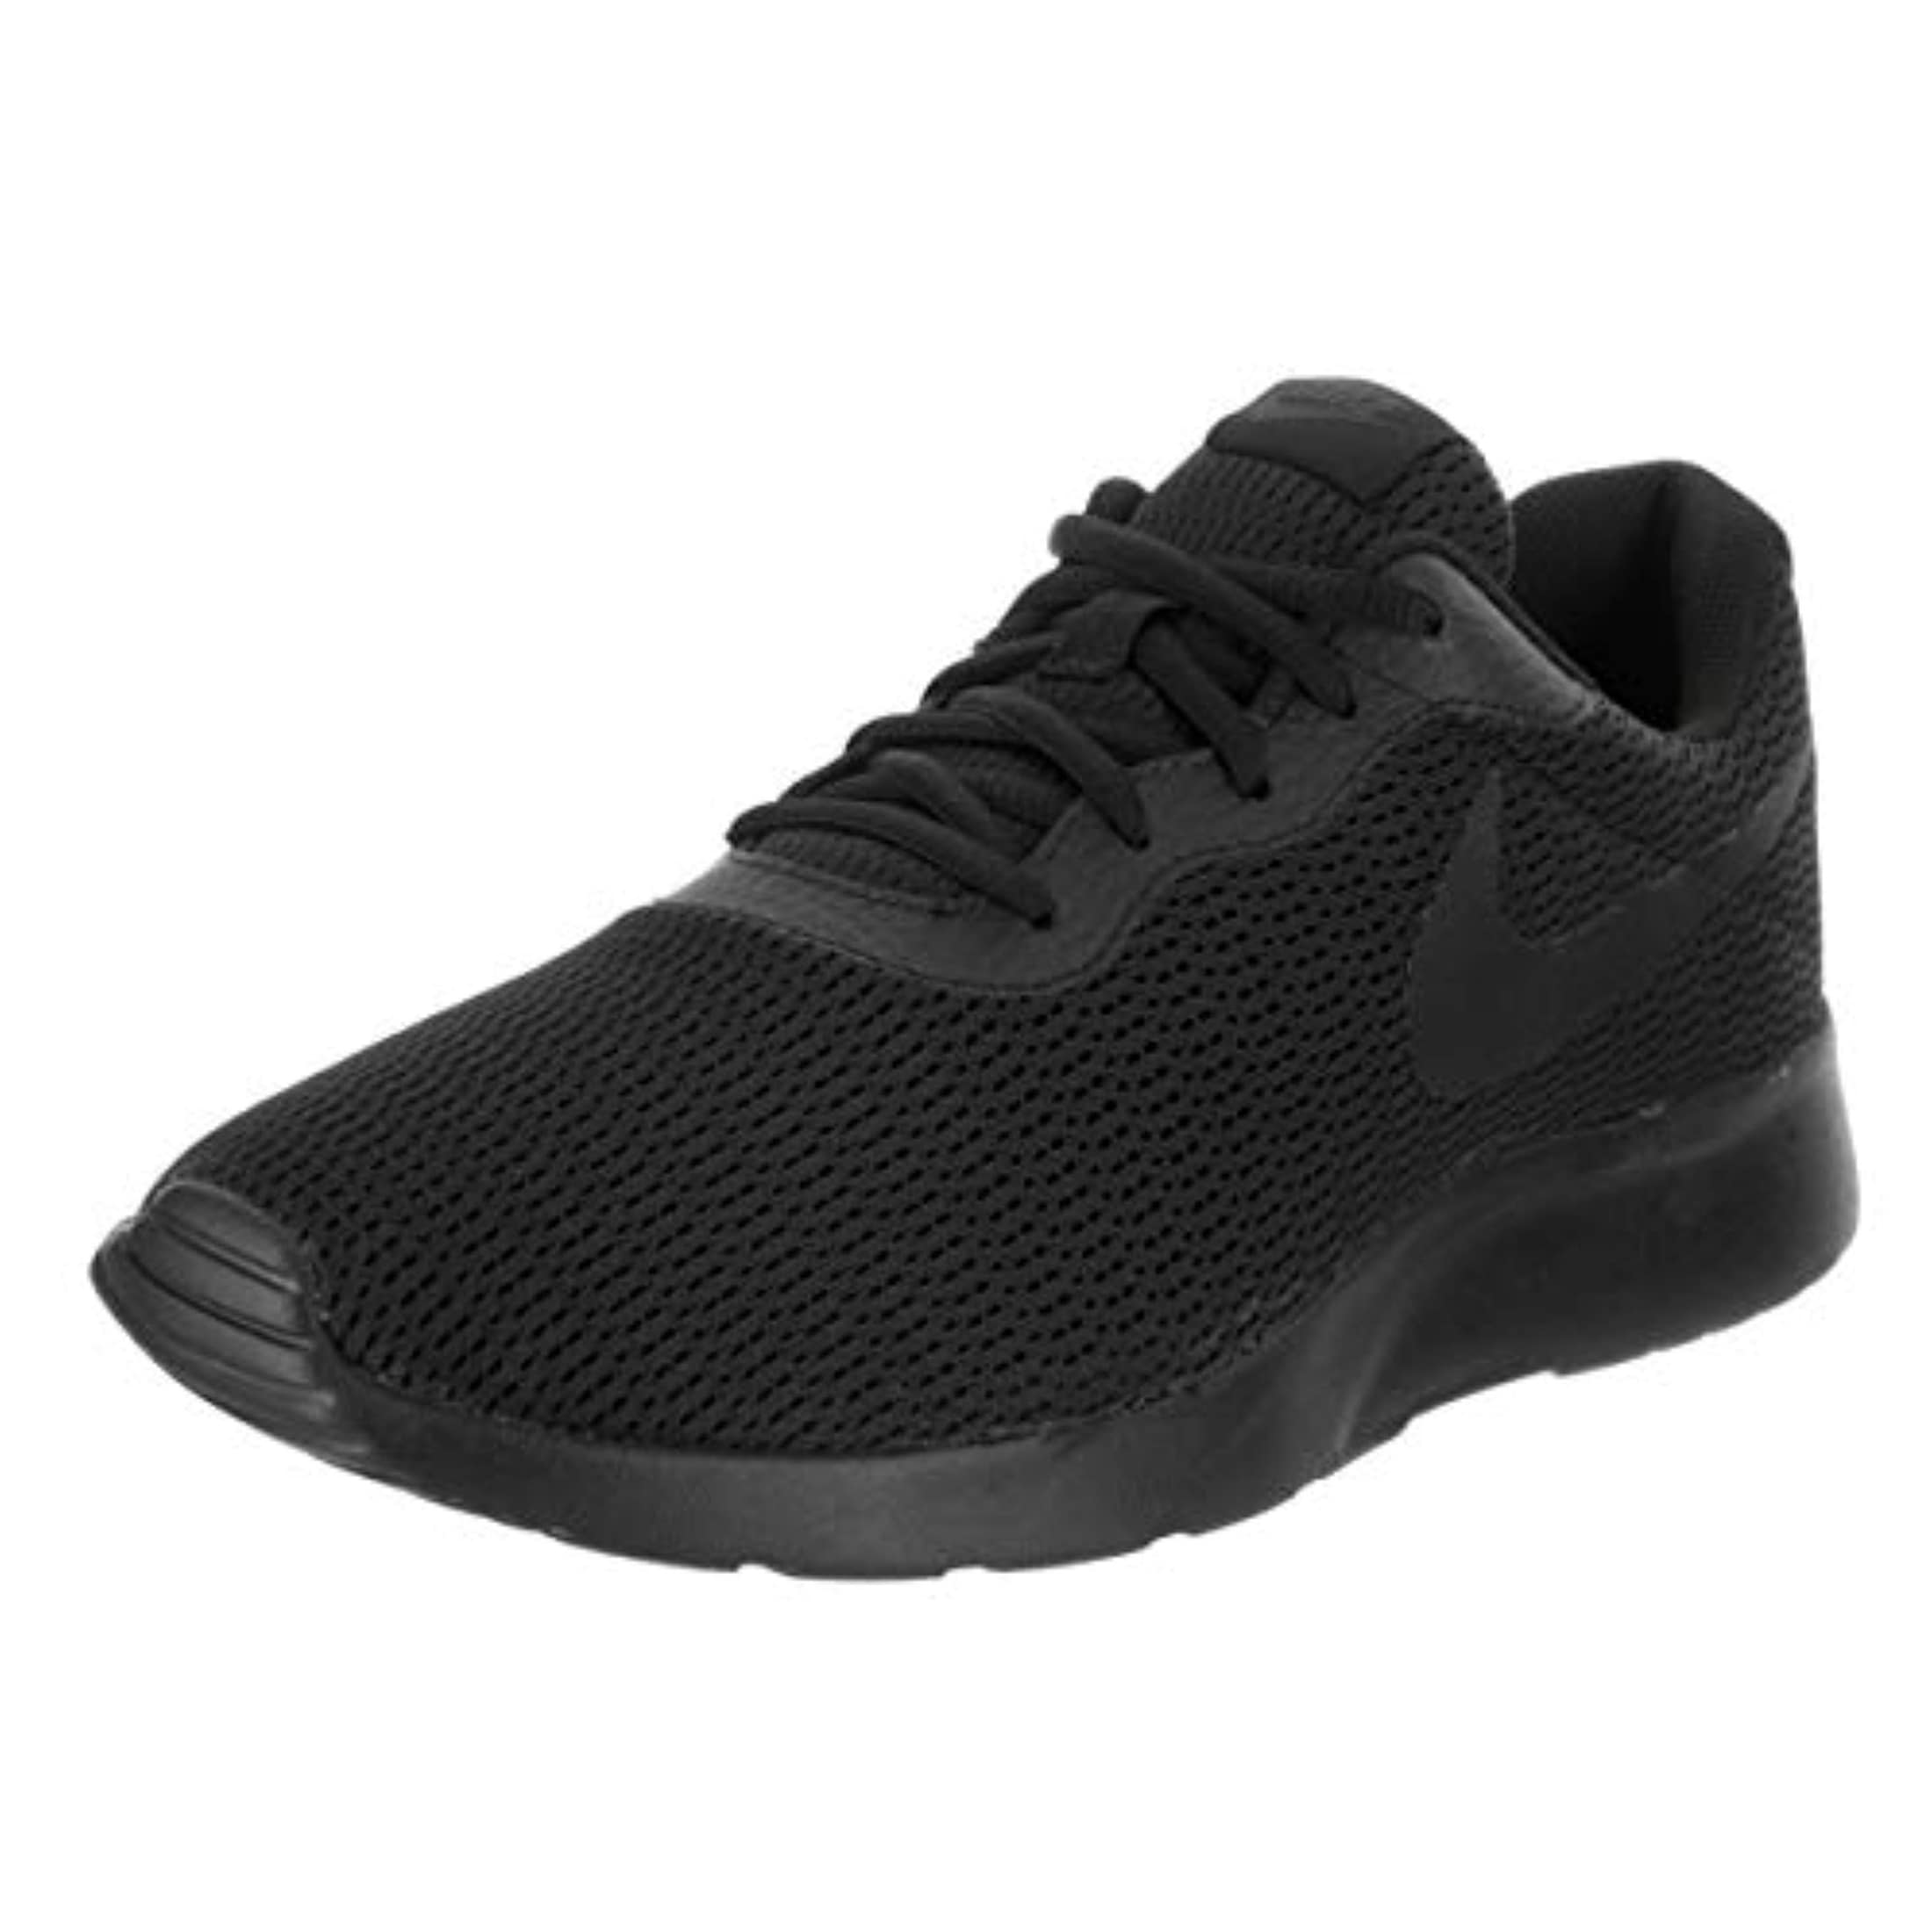 mens nike shoes 12 wide